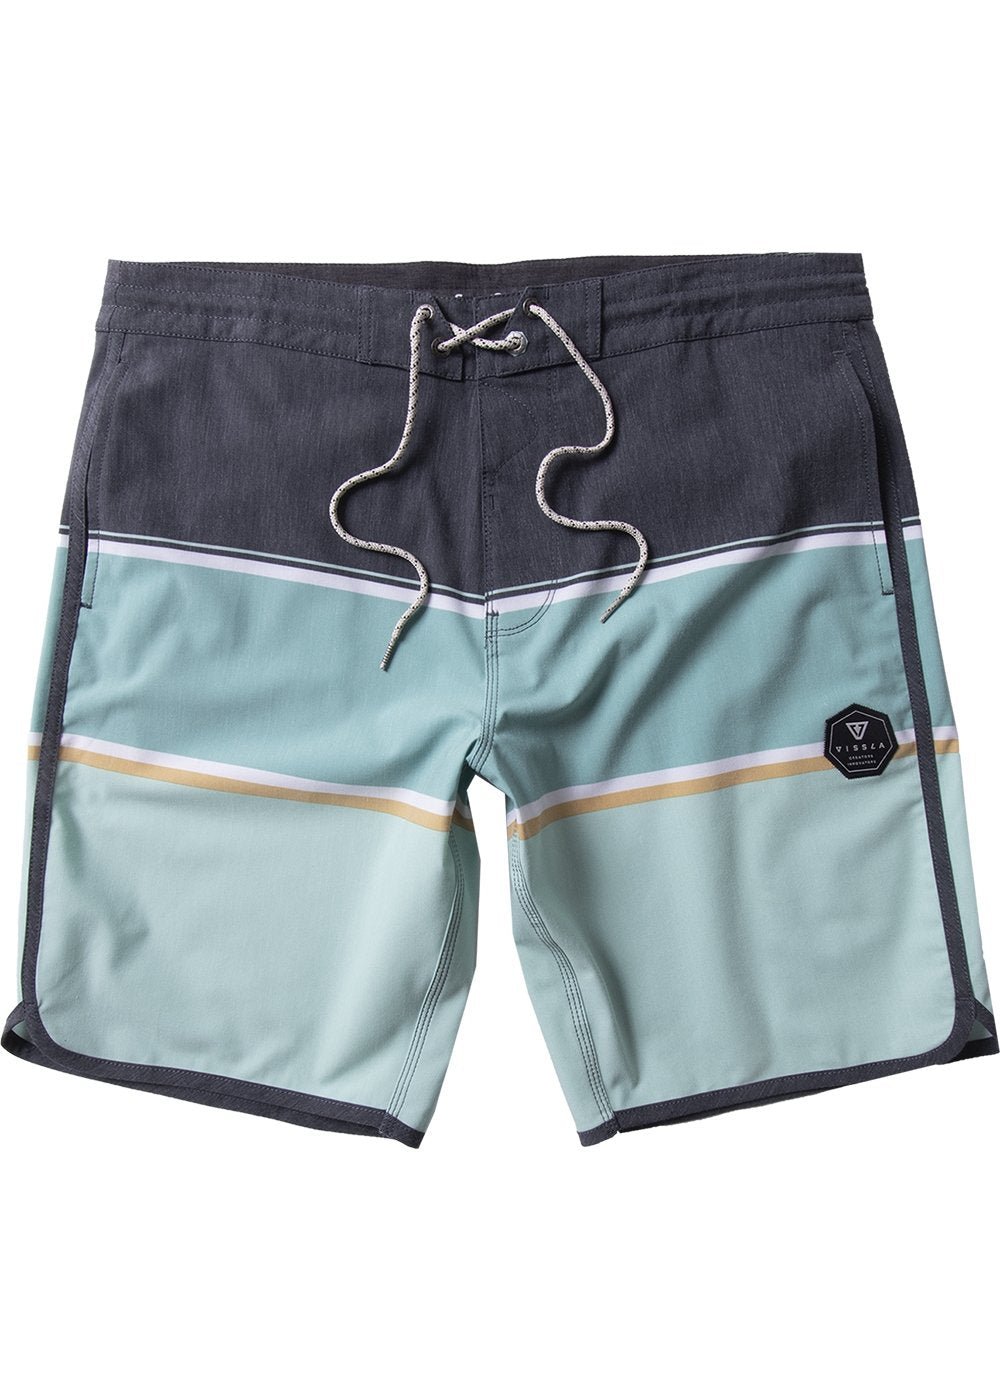 The Point 19.5" Boardshort-MNT - Stoke Outlets